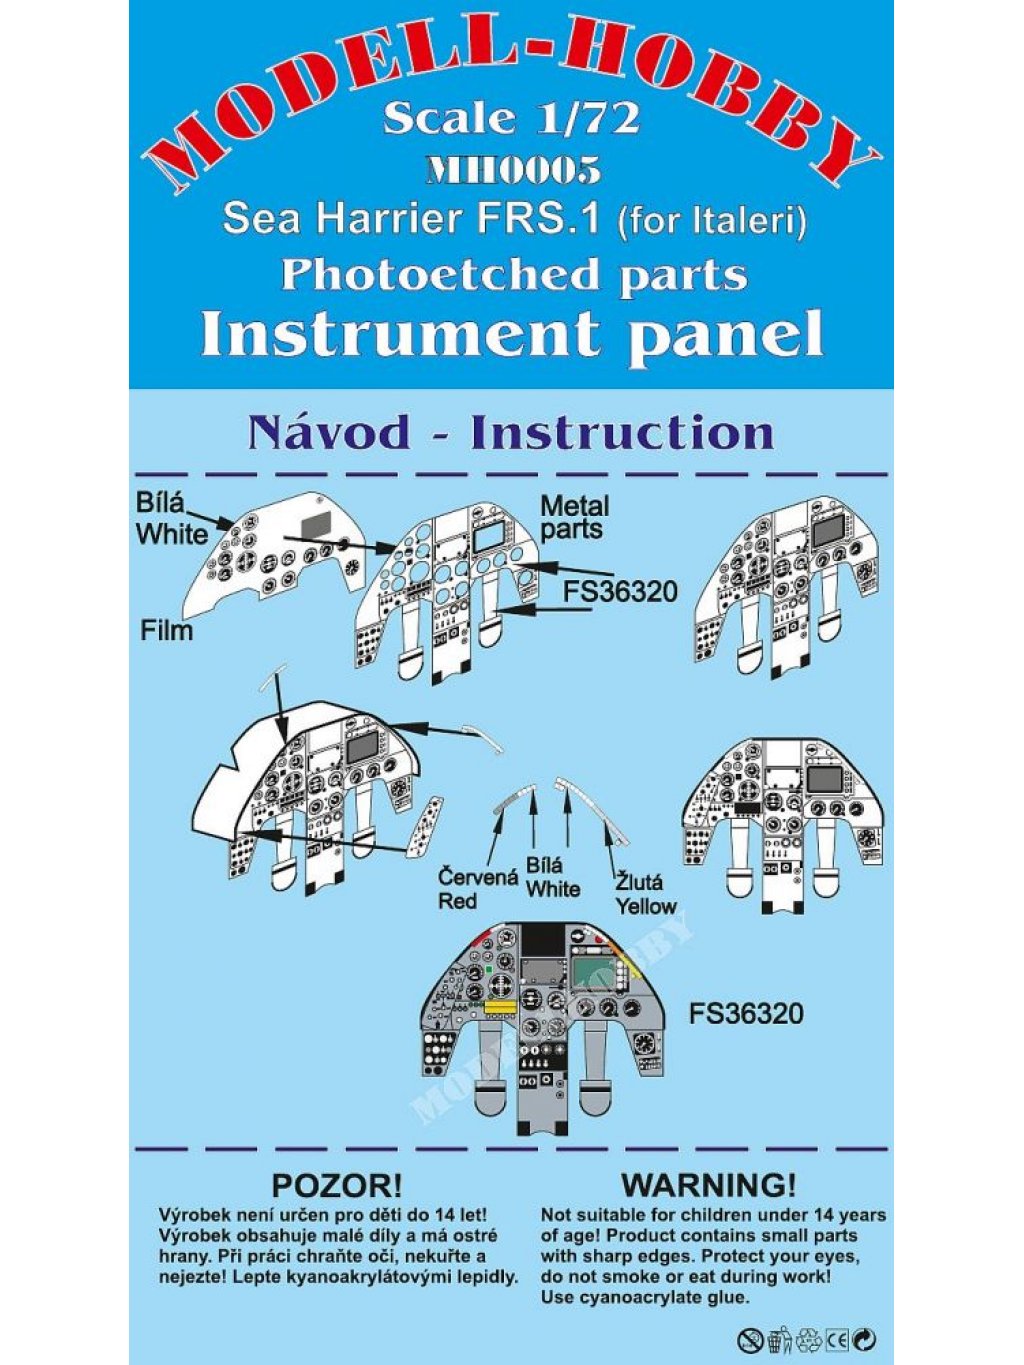 Sea Harrier FRS-1 Photoetched parts instrument panel for Italeri ex Modell-Hobby